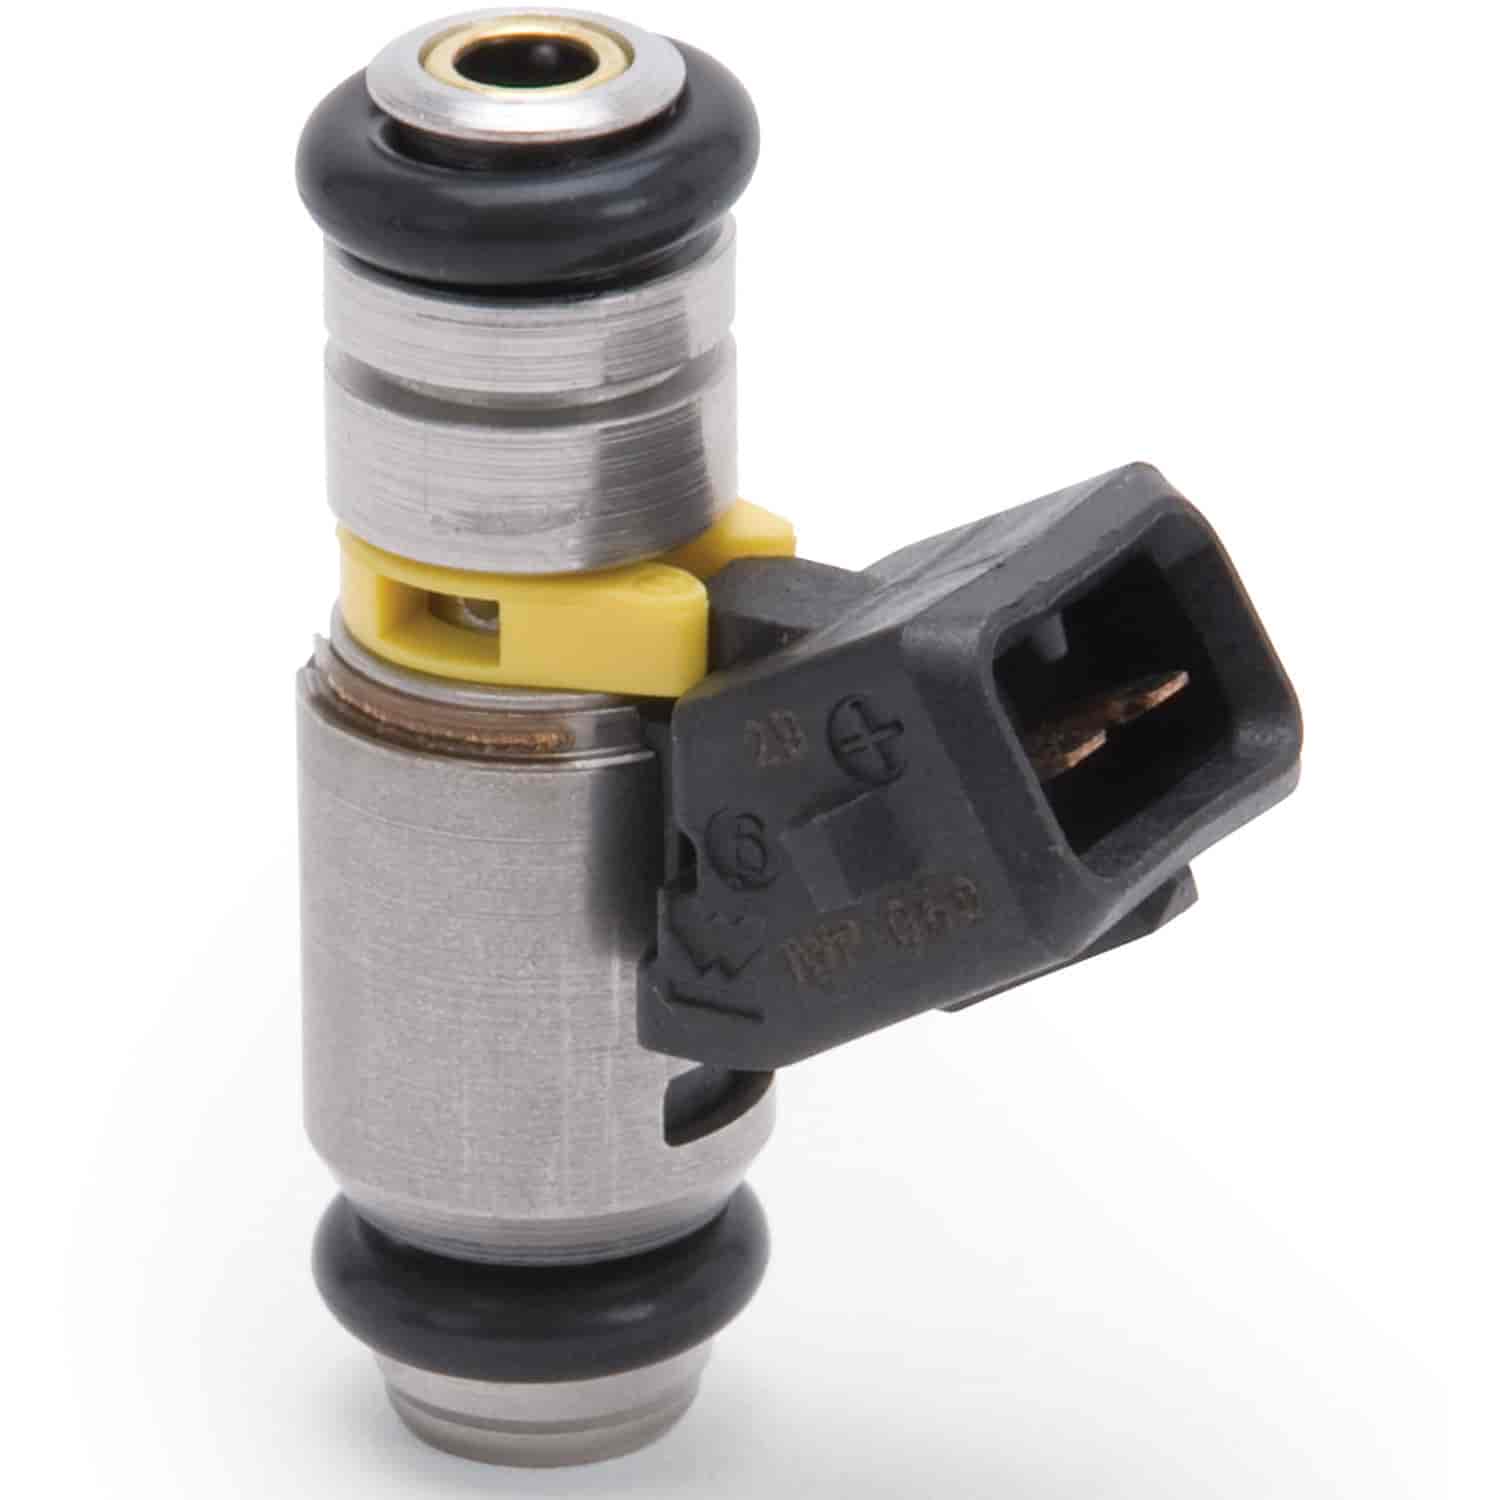 Pico Fuel Injector 44lbs/hour @ 45 psi